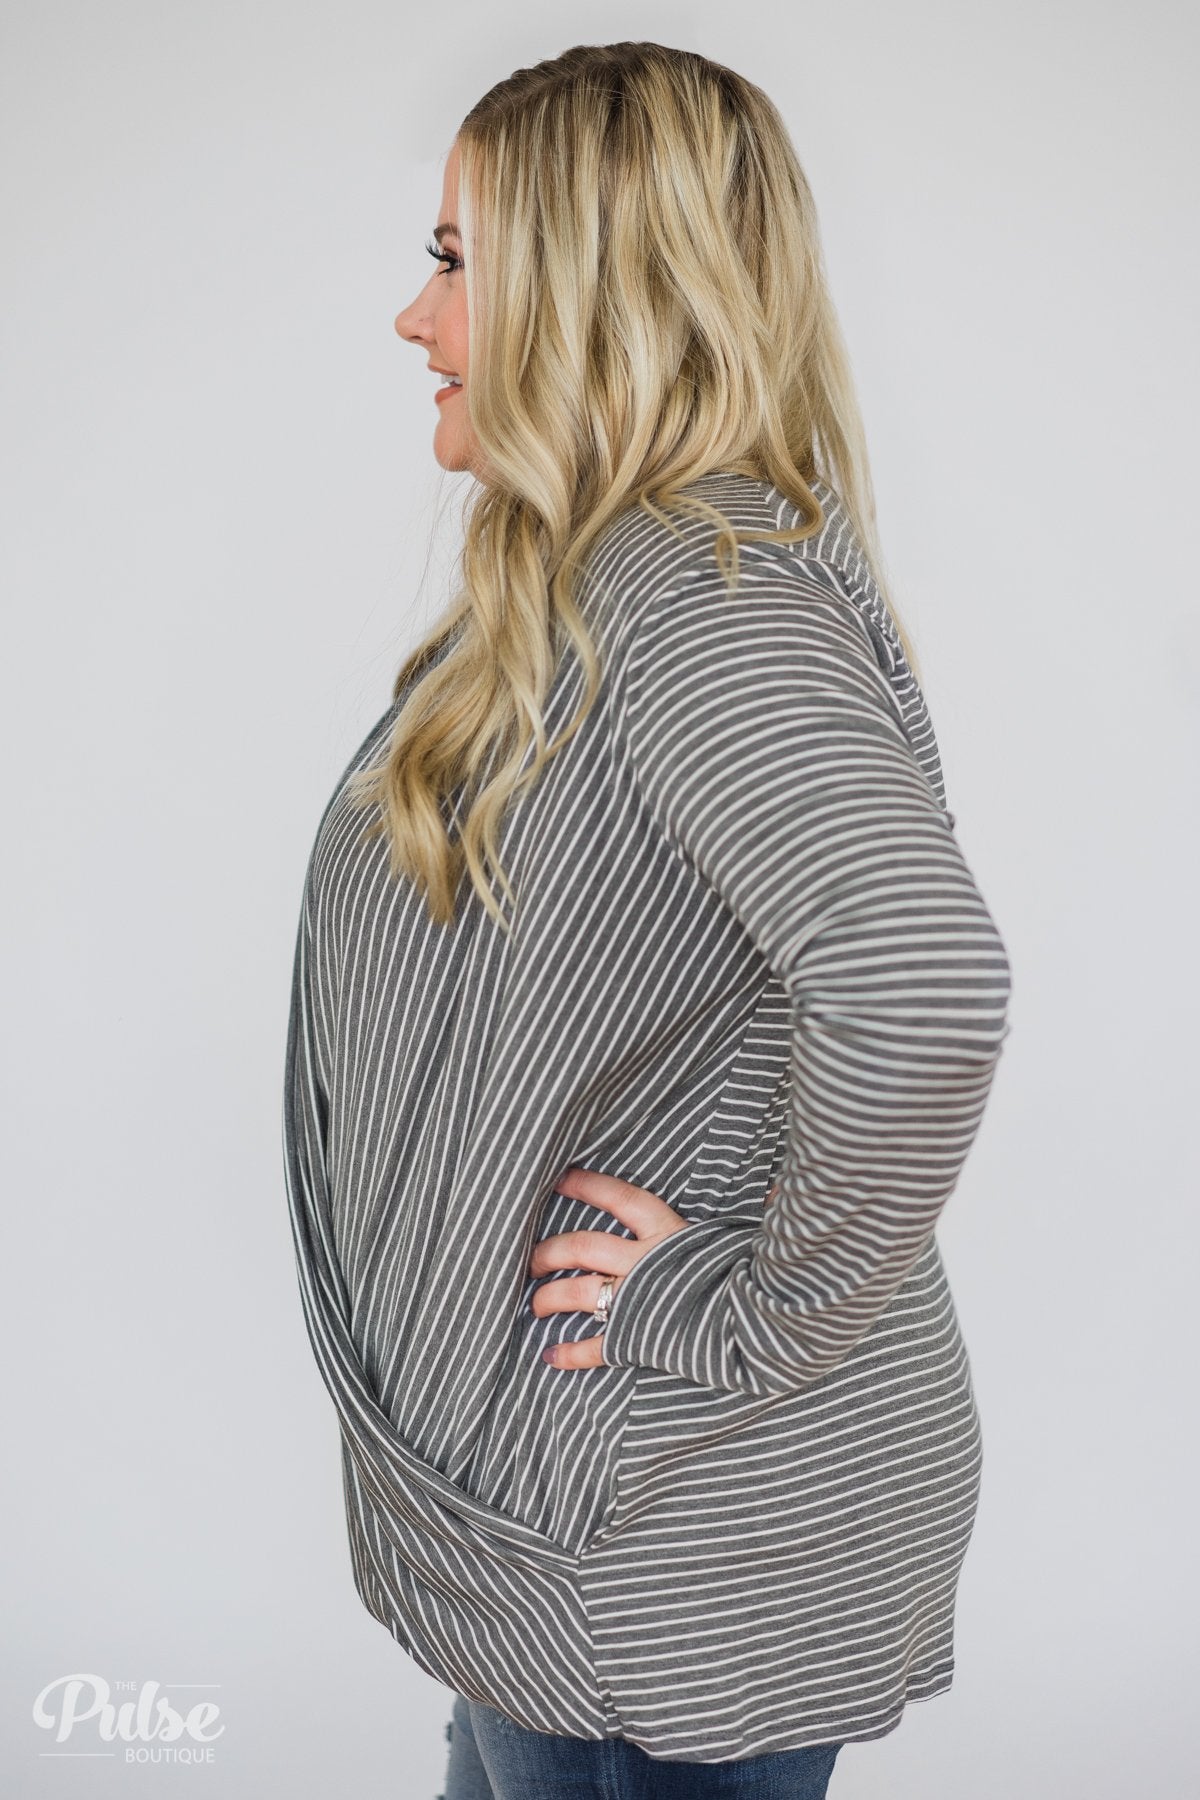 Wrap It Up Long Sleeve Striped Top- Charcoal Grey